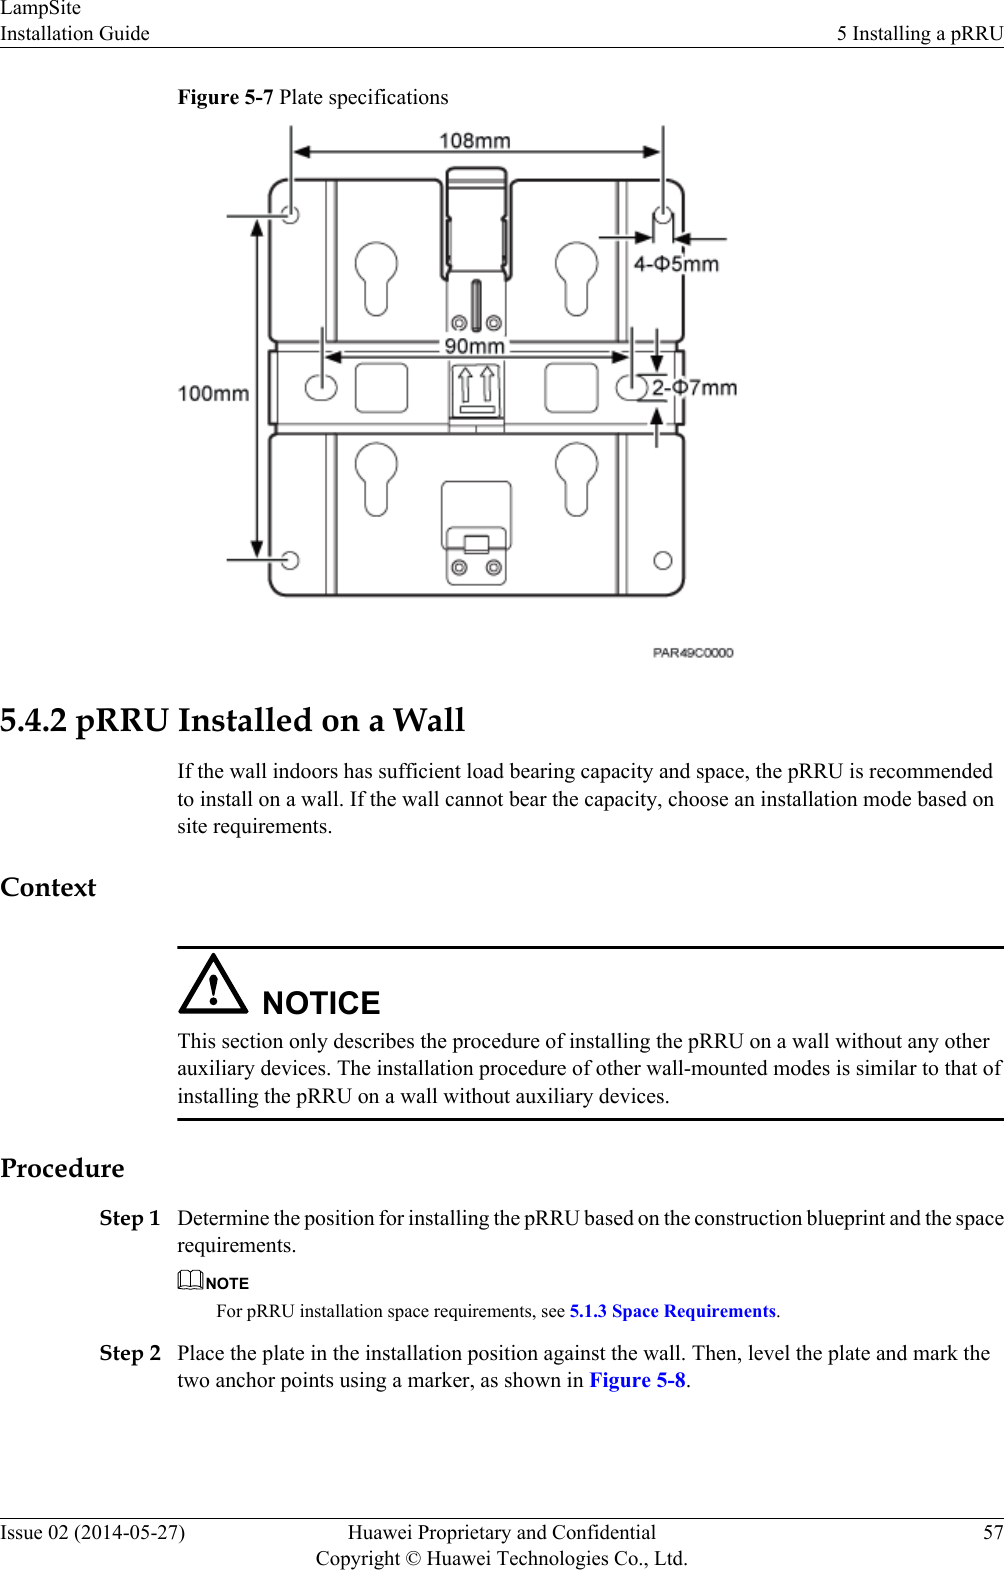 Figure 5-7 Plate specifications5.4.2 pRRU Installed on a WallIf the wall indoors has sufficient load bearing capacity and space, the pRRU is recommendedto install on a wall. If the wall cannot bear the capacity, choose an installation mode based onsite requirements.ContextNOTICEThis section only describes the procedure of installing the pRRU on a wall without any otherauxiliary devices. The installation procedure of other wall-mounted modes is similar to that ofinstalling the pRRU on a wall without auxiliary devices.ProcedureStep 1 Determine the position for installing the pRRU based on the construction blueprint and the spacerequirements.NOTEFor pRRU installation space requirements, see 5.1.3 Space Requirements.Step 2 Place the plate in the installation position against the wall. Then, level the plate and mark thetwo anchor points using a marker, as shown in Figure 5-8.LampSiteInstallation Guide 5 Installing a pRRUIssue 02 (2014-05-27) Huawei Proprietary and ConfidentialCopyright © Huawei Technologies Co., Ltd.57